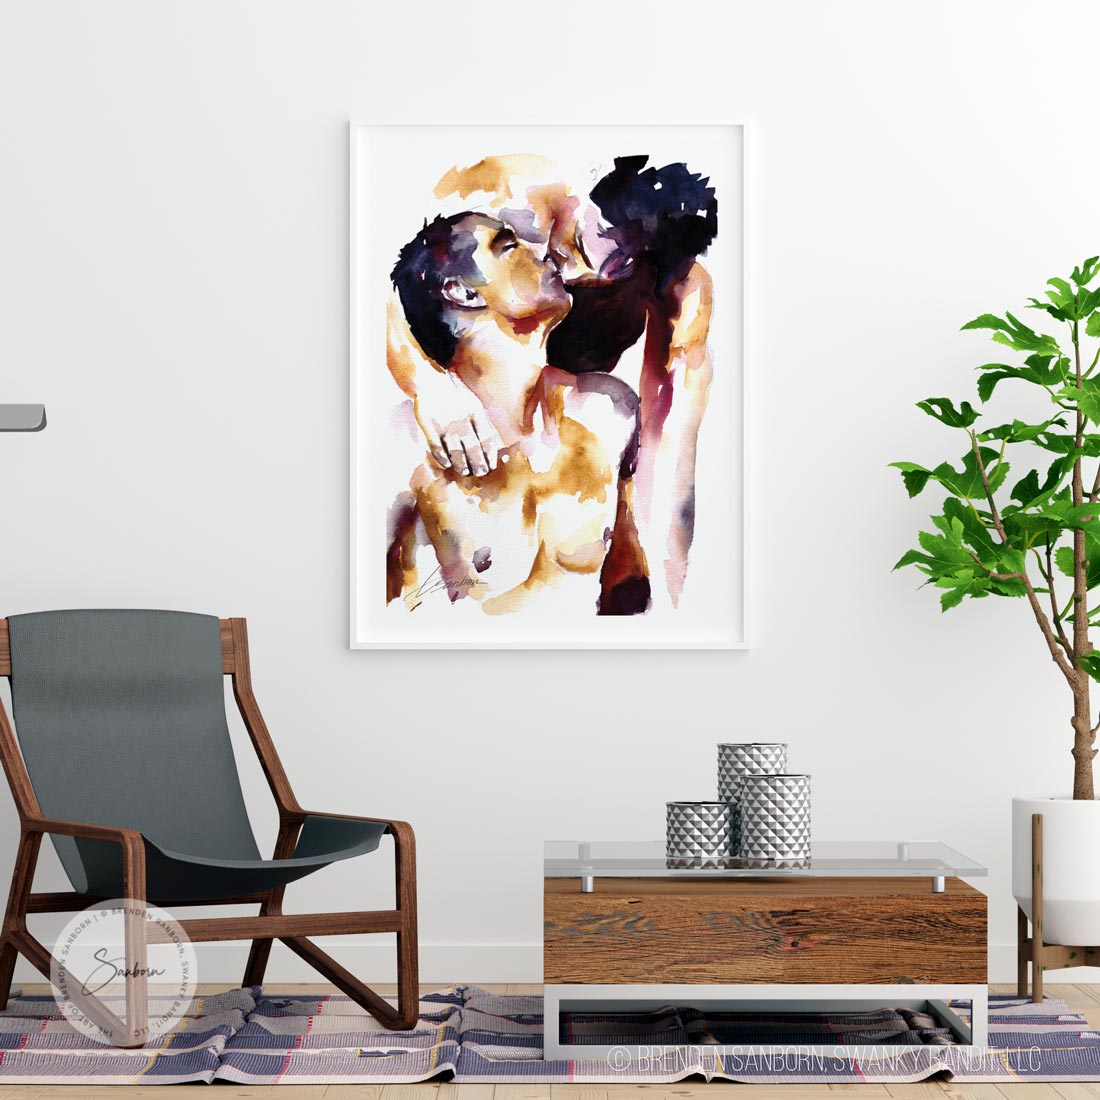 Whispers of Affection: Two Shirtless Men, One Kiss - Giclee Art Print